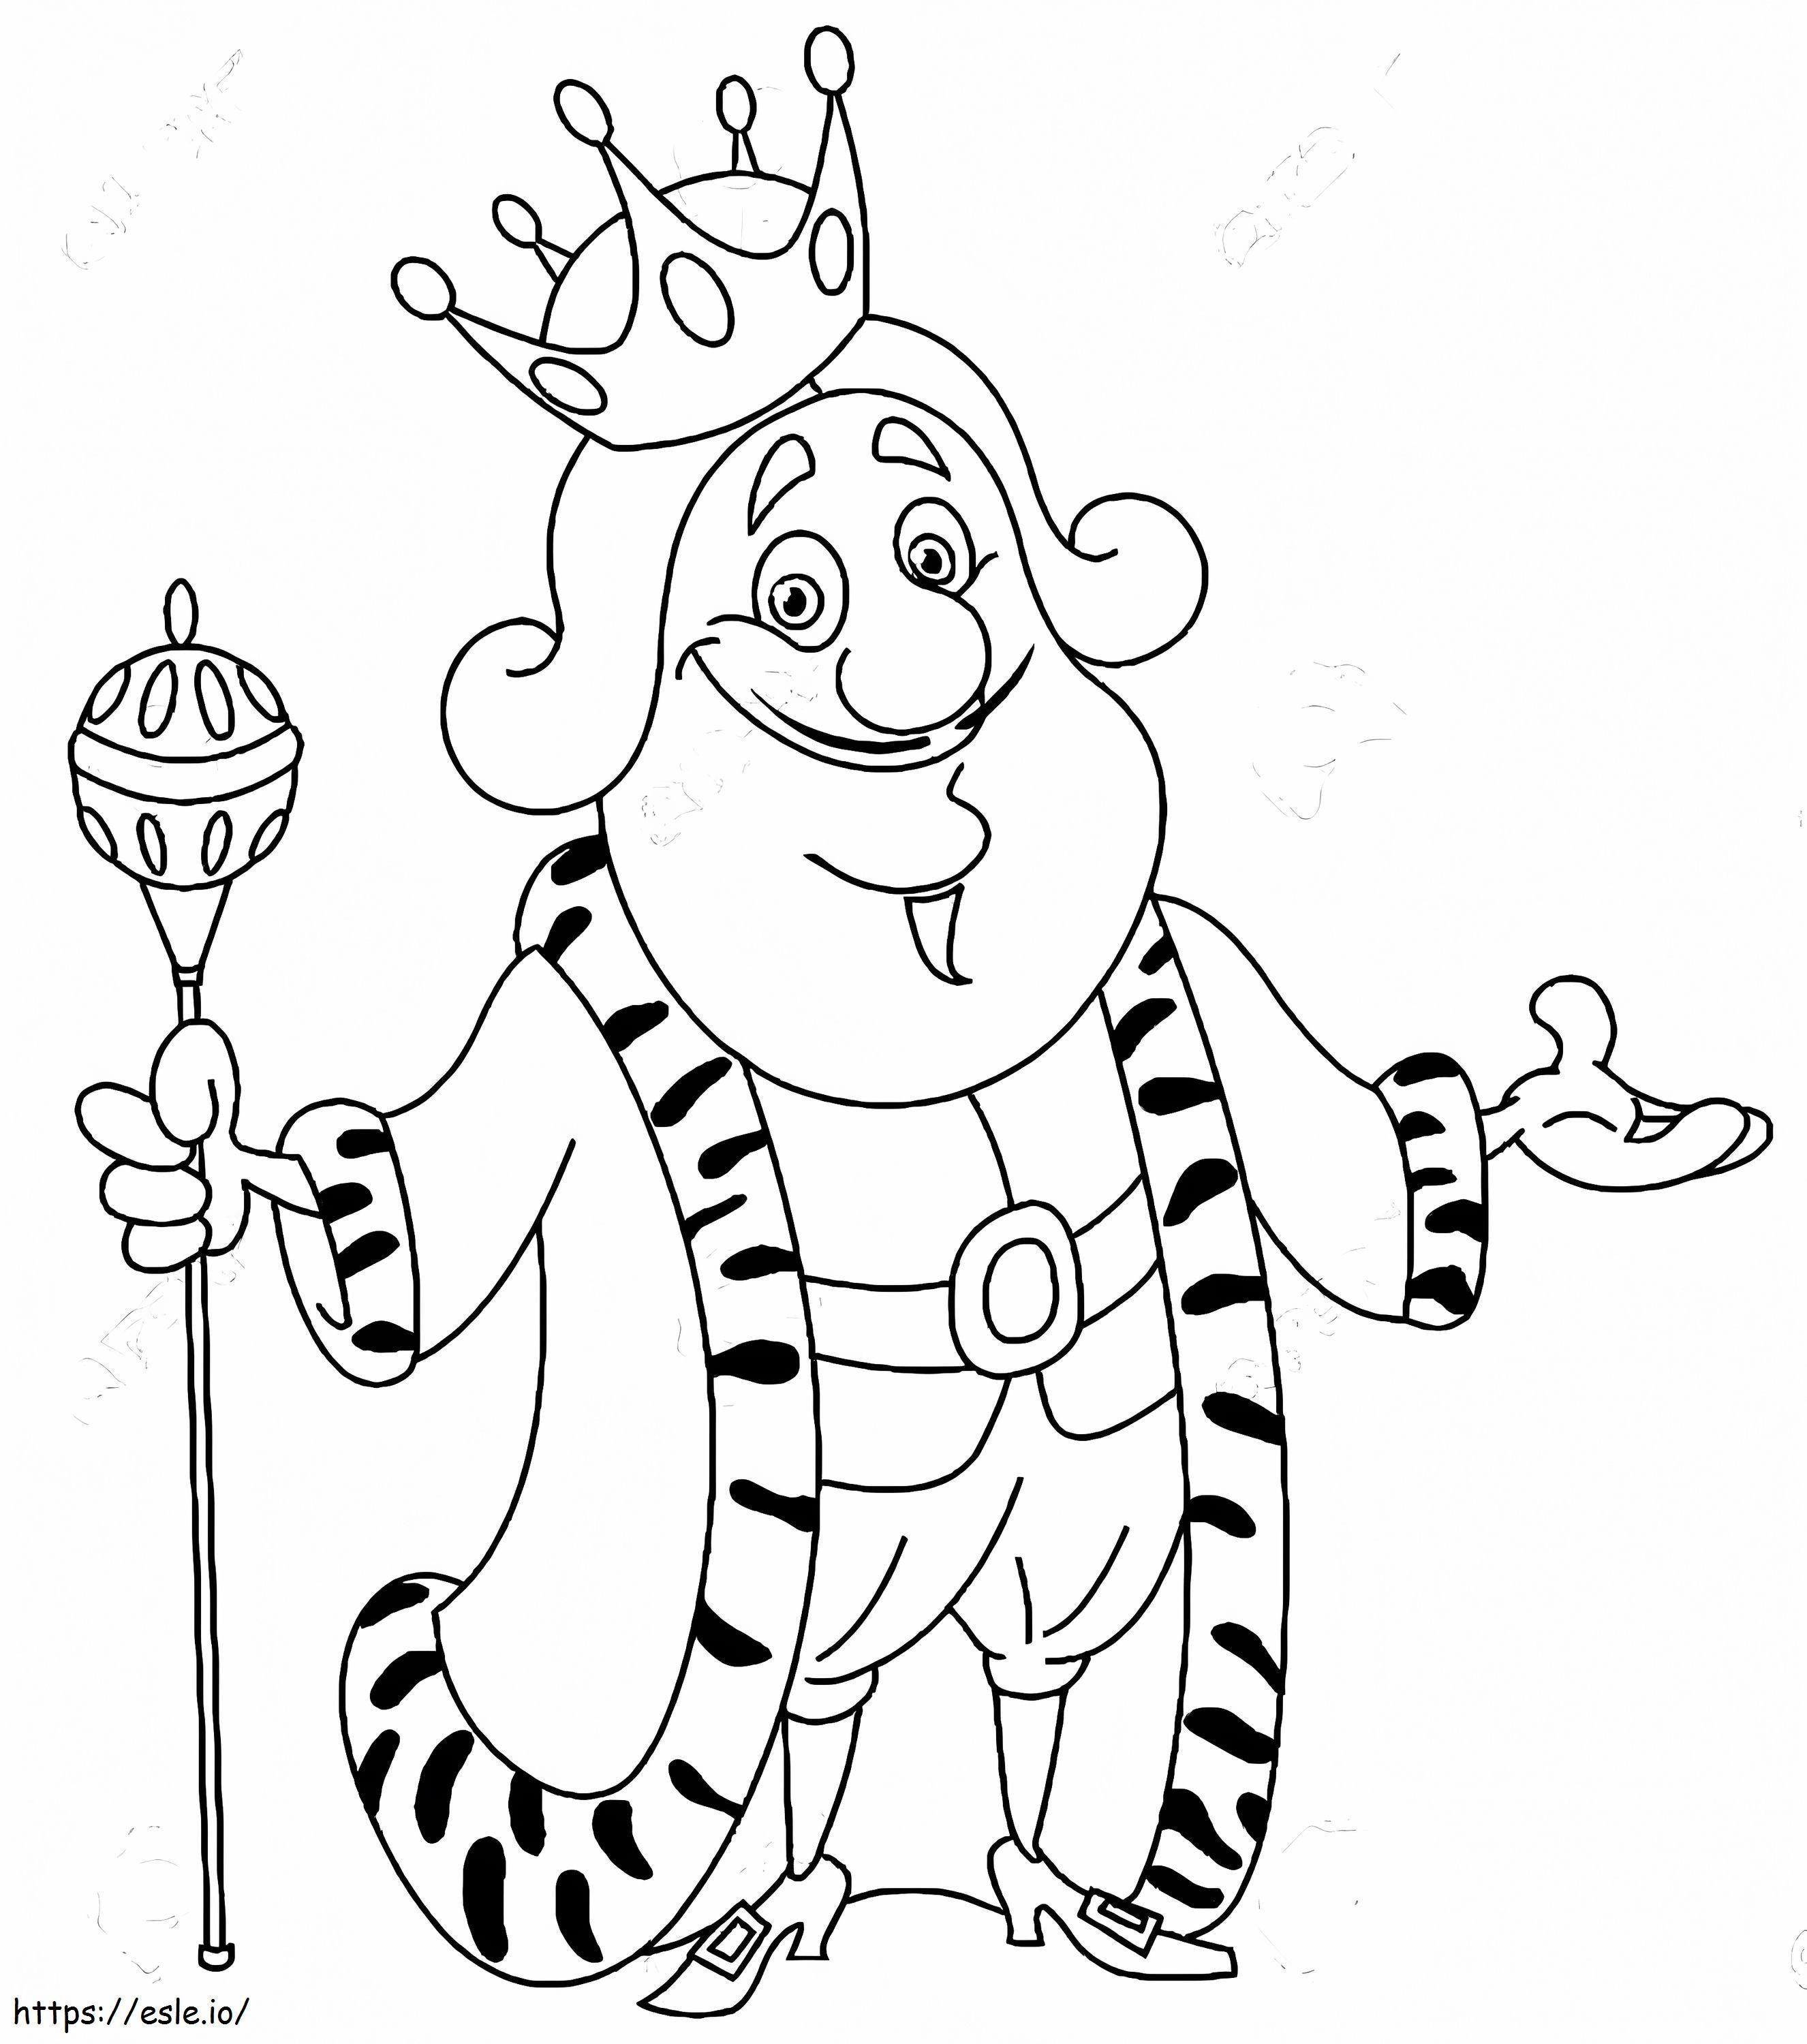 Free King coloring page